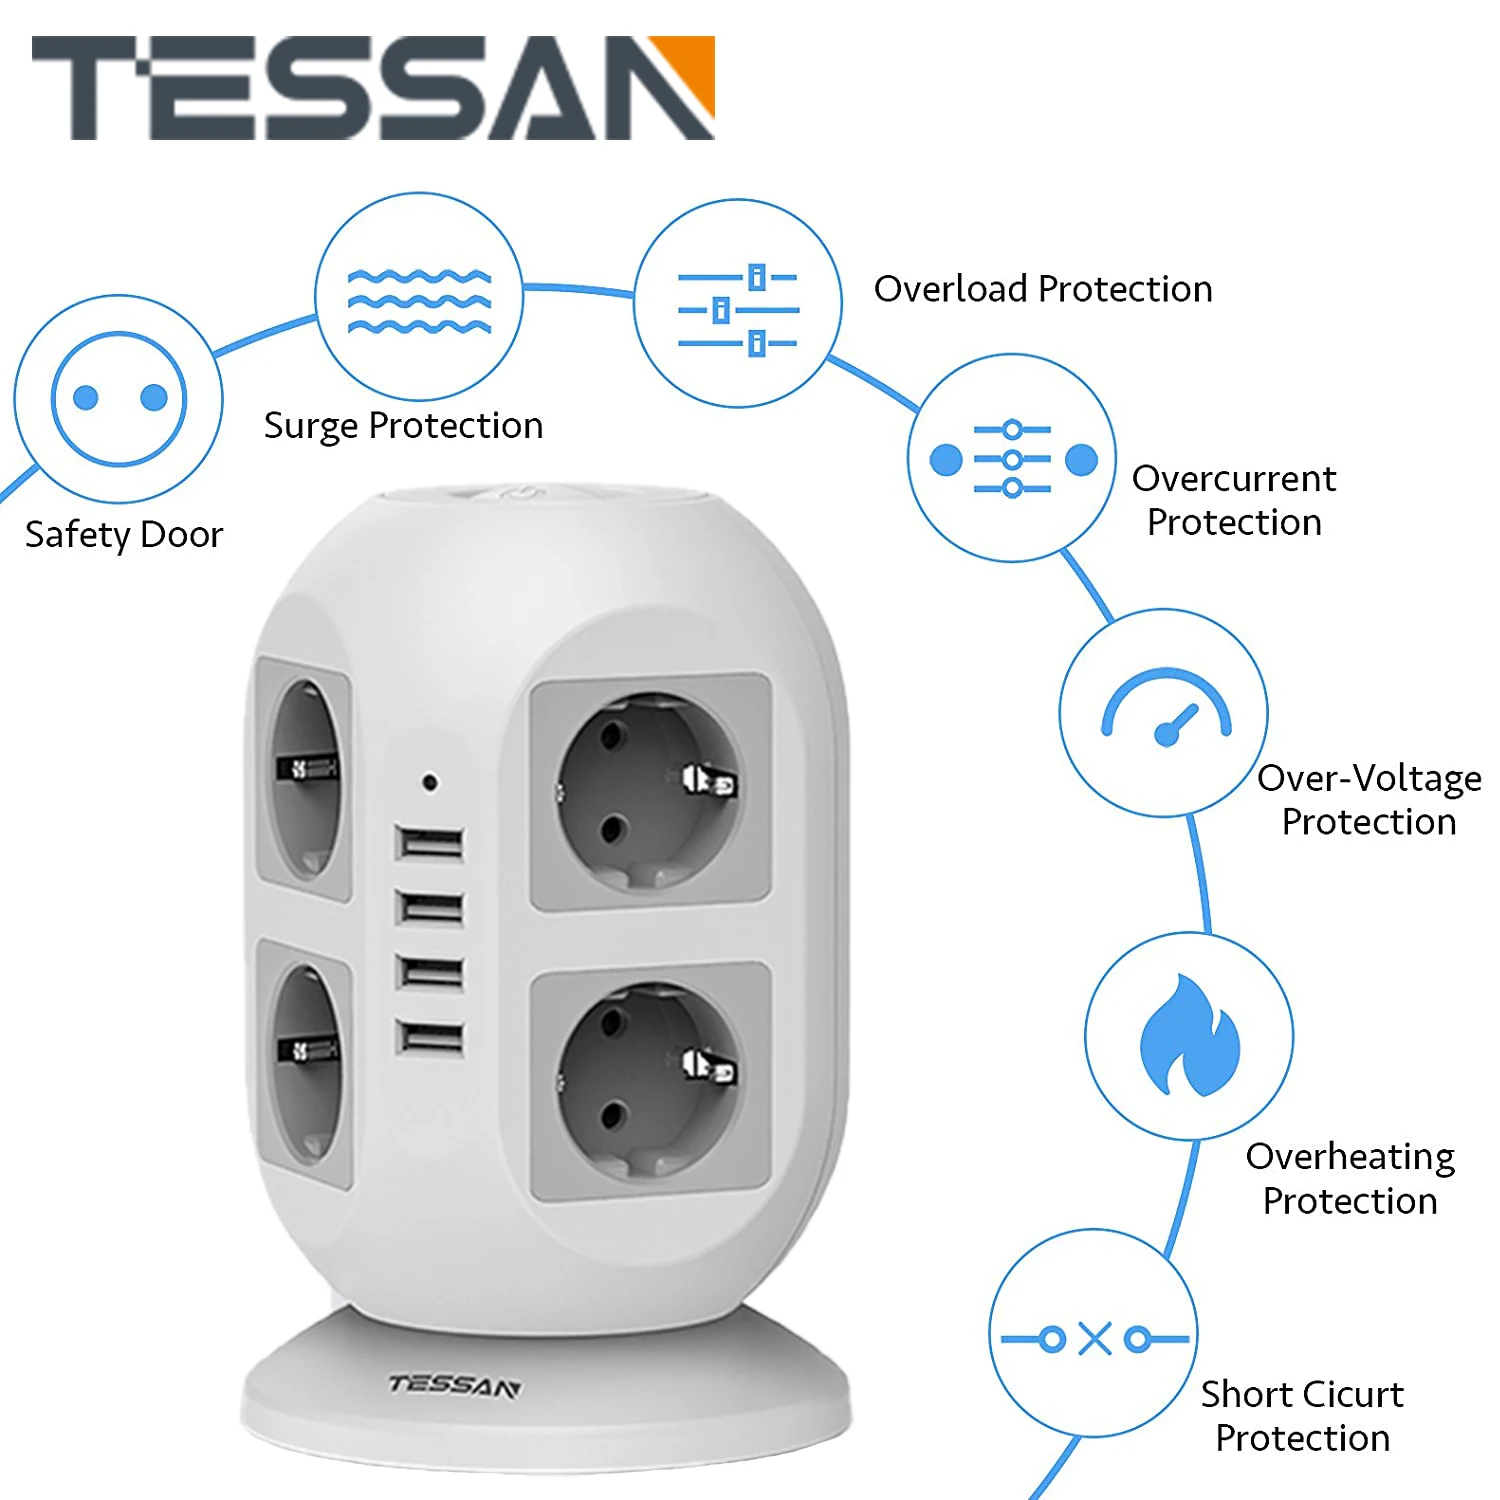 

TESSAN 8-Way Socket Strip (2500W / 10A) with 2M Cable and 4 USB Charge Ports Multi Sockets Tower Power Strip Overload Protection